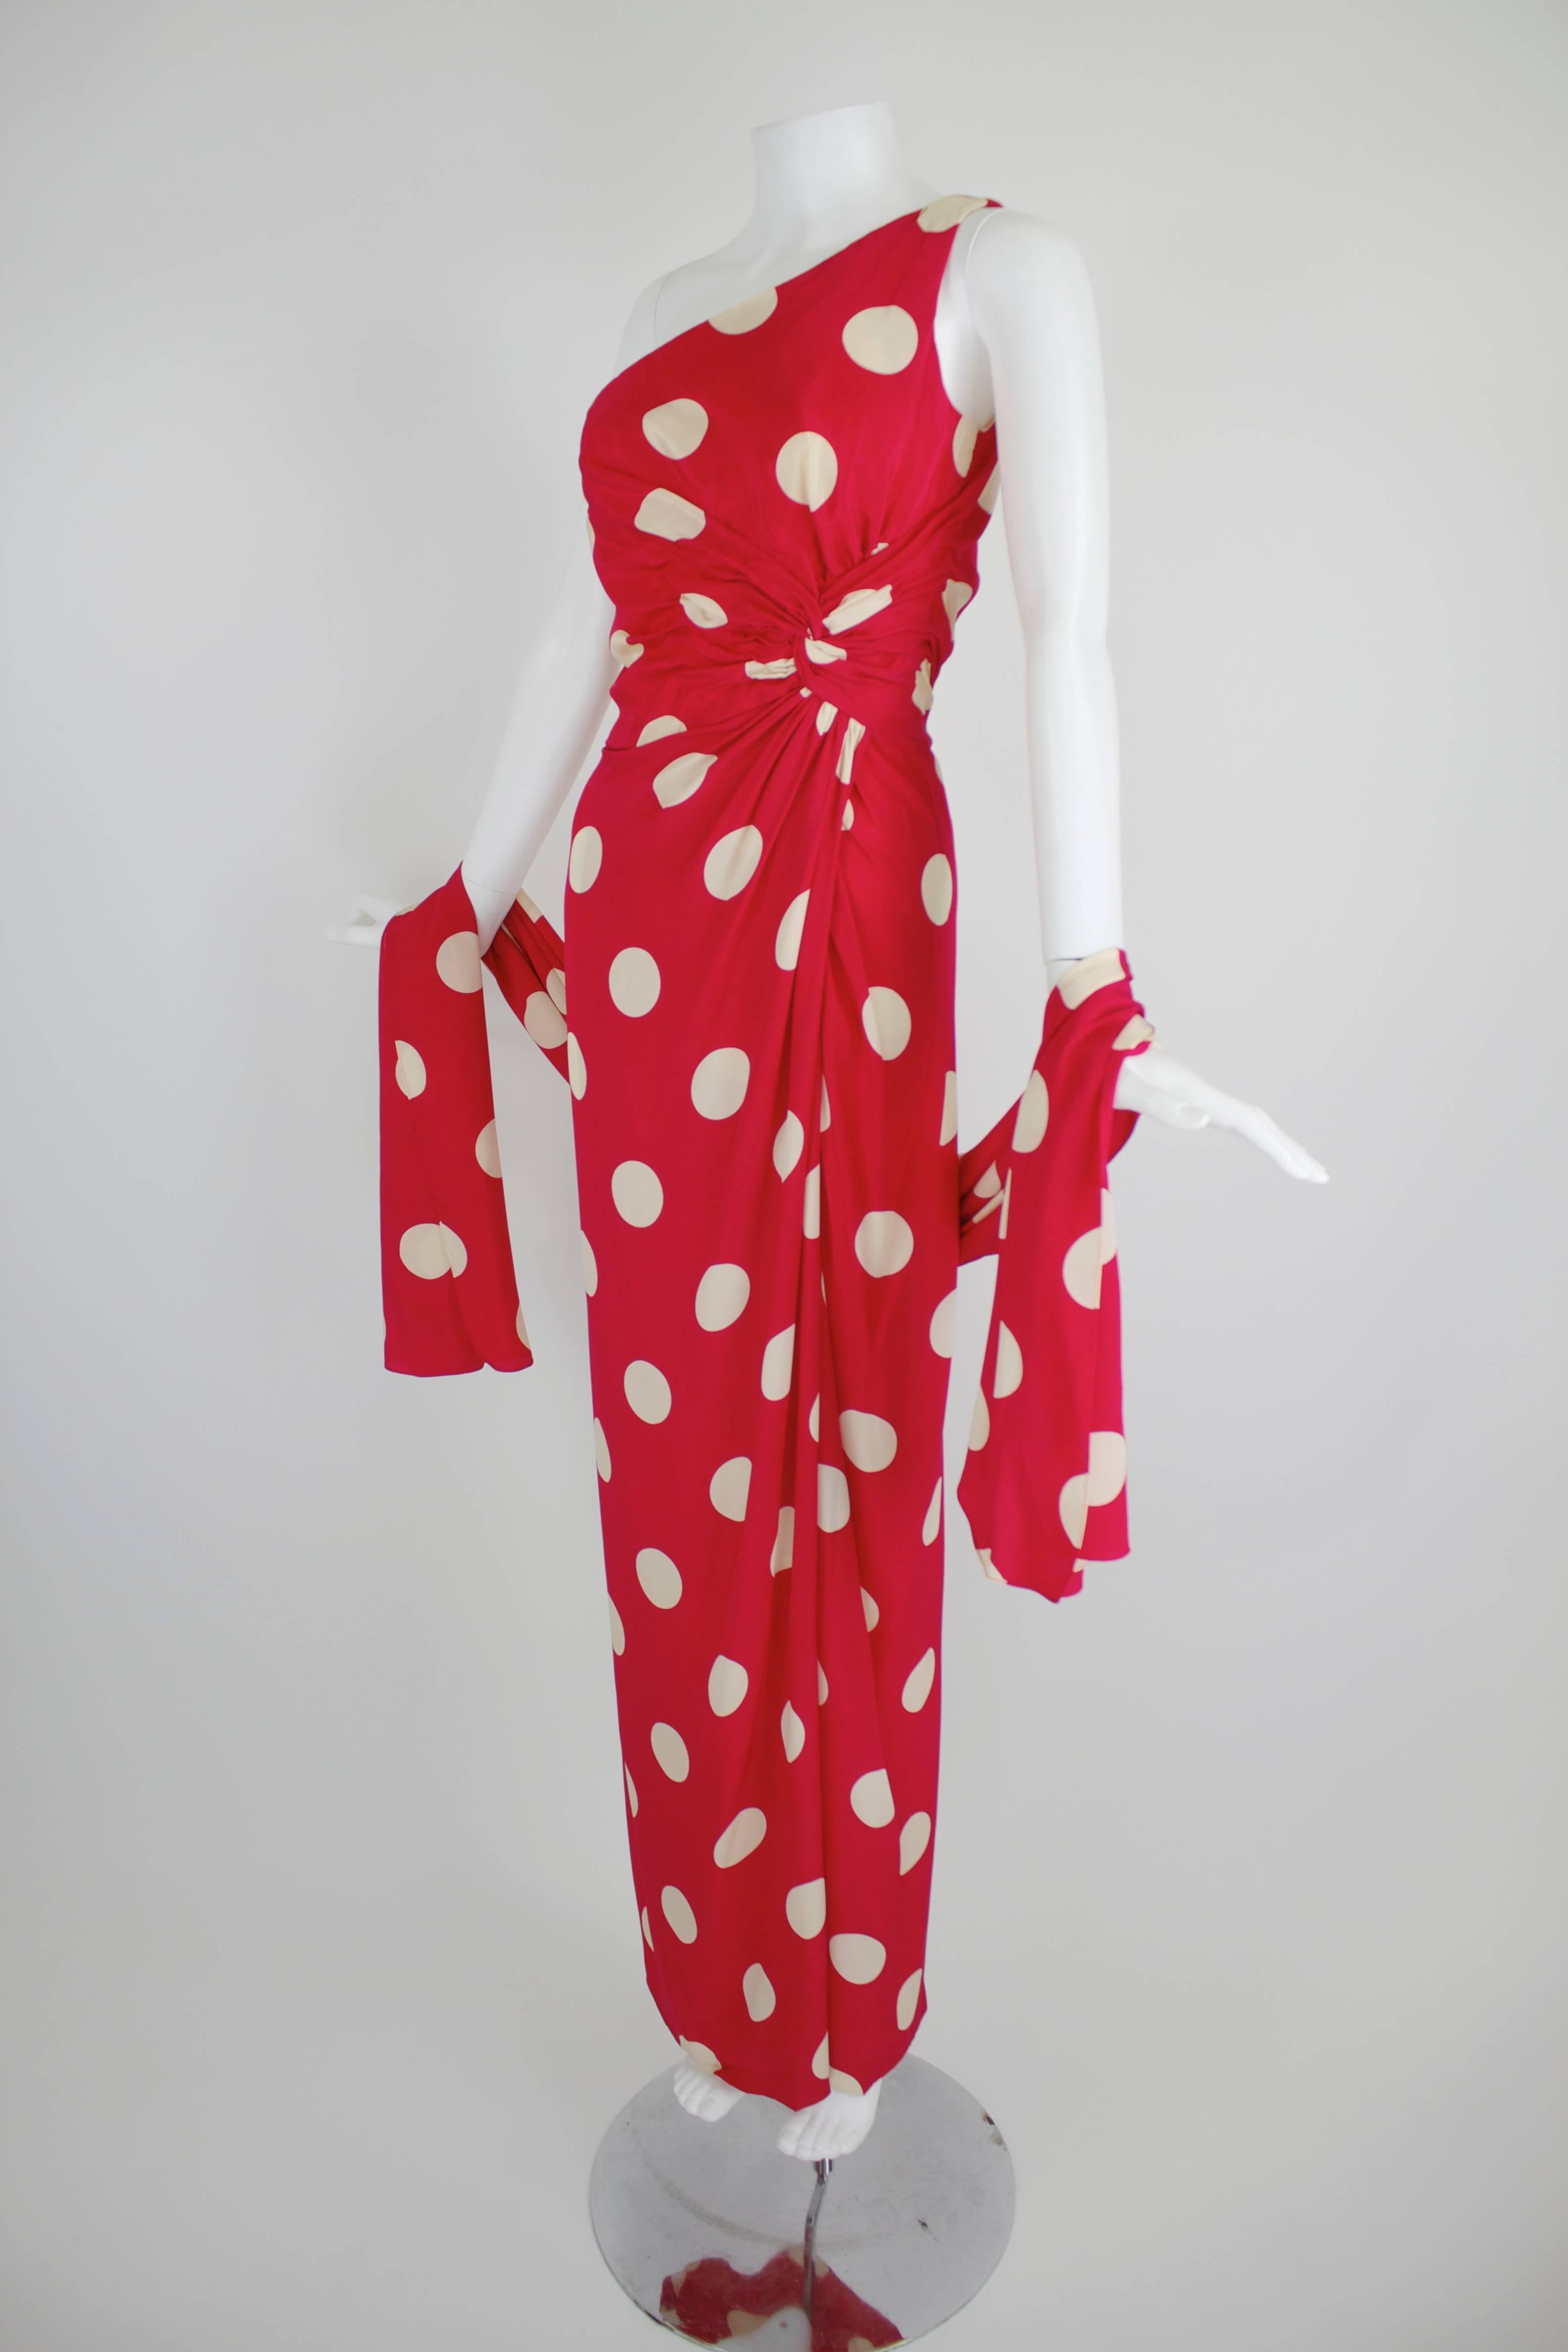 A gorgeous evening gown from Lillie Rubin, done in strikingly beautiful red silk, covered with classic white polka dots, and a matching wrap. Unlined. Side zip.

Measurements--
Bust: up to 36 inches
Waist: up to 27 inches
Hip: up to 36